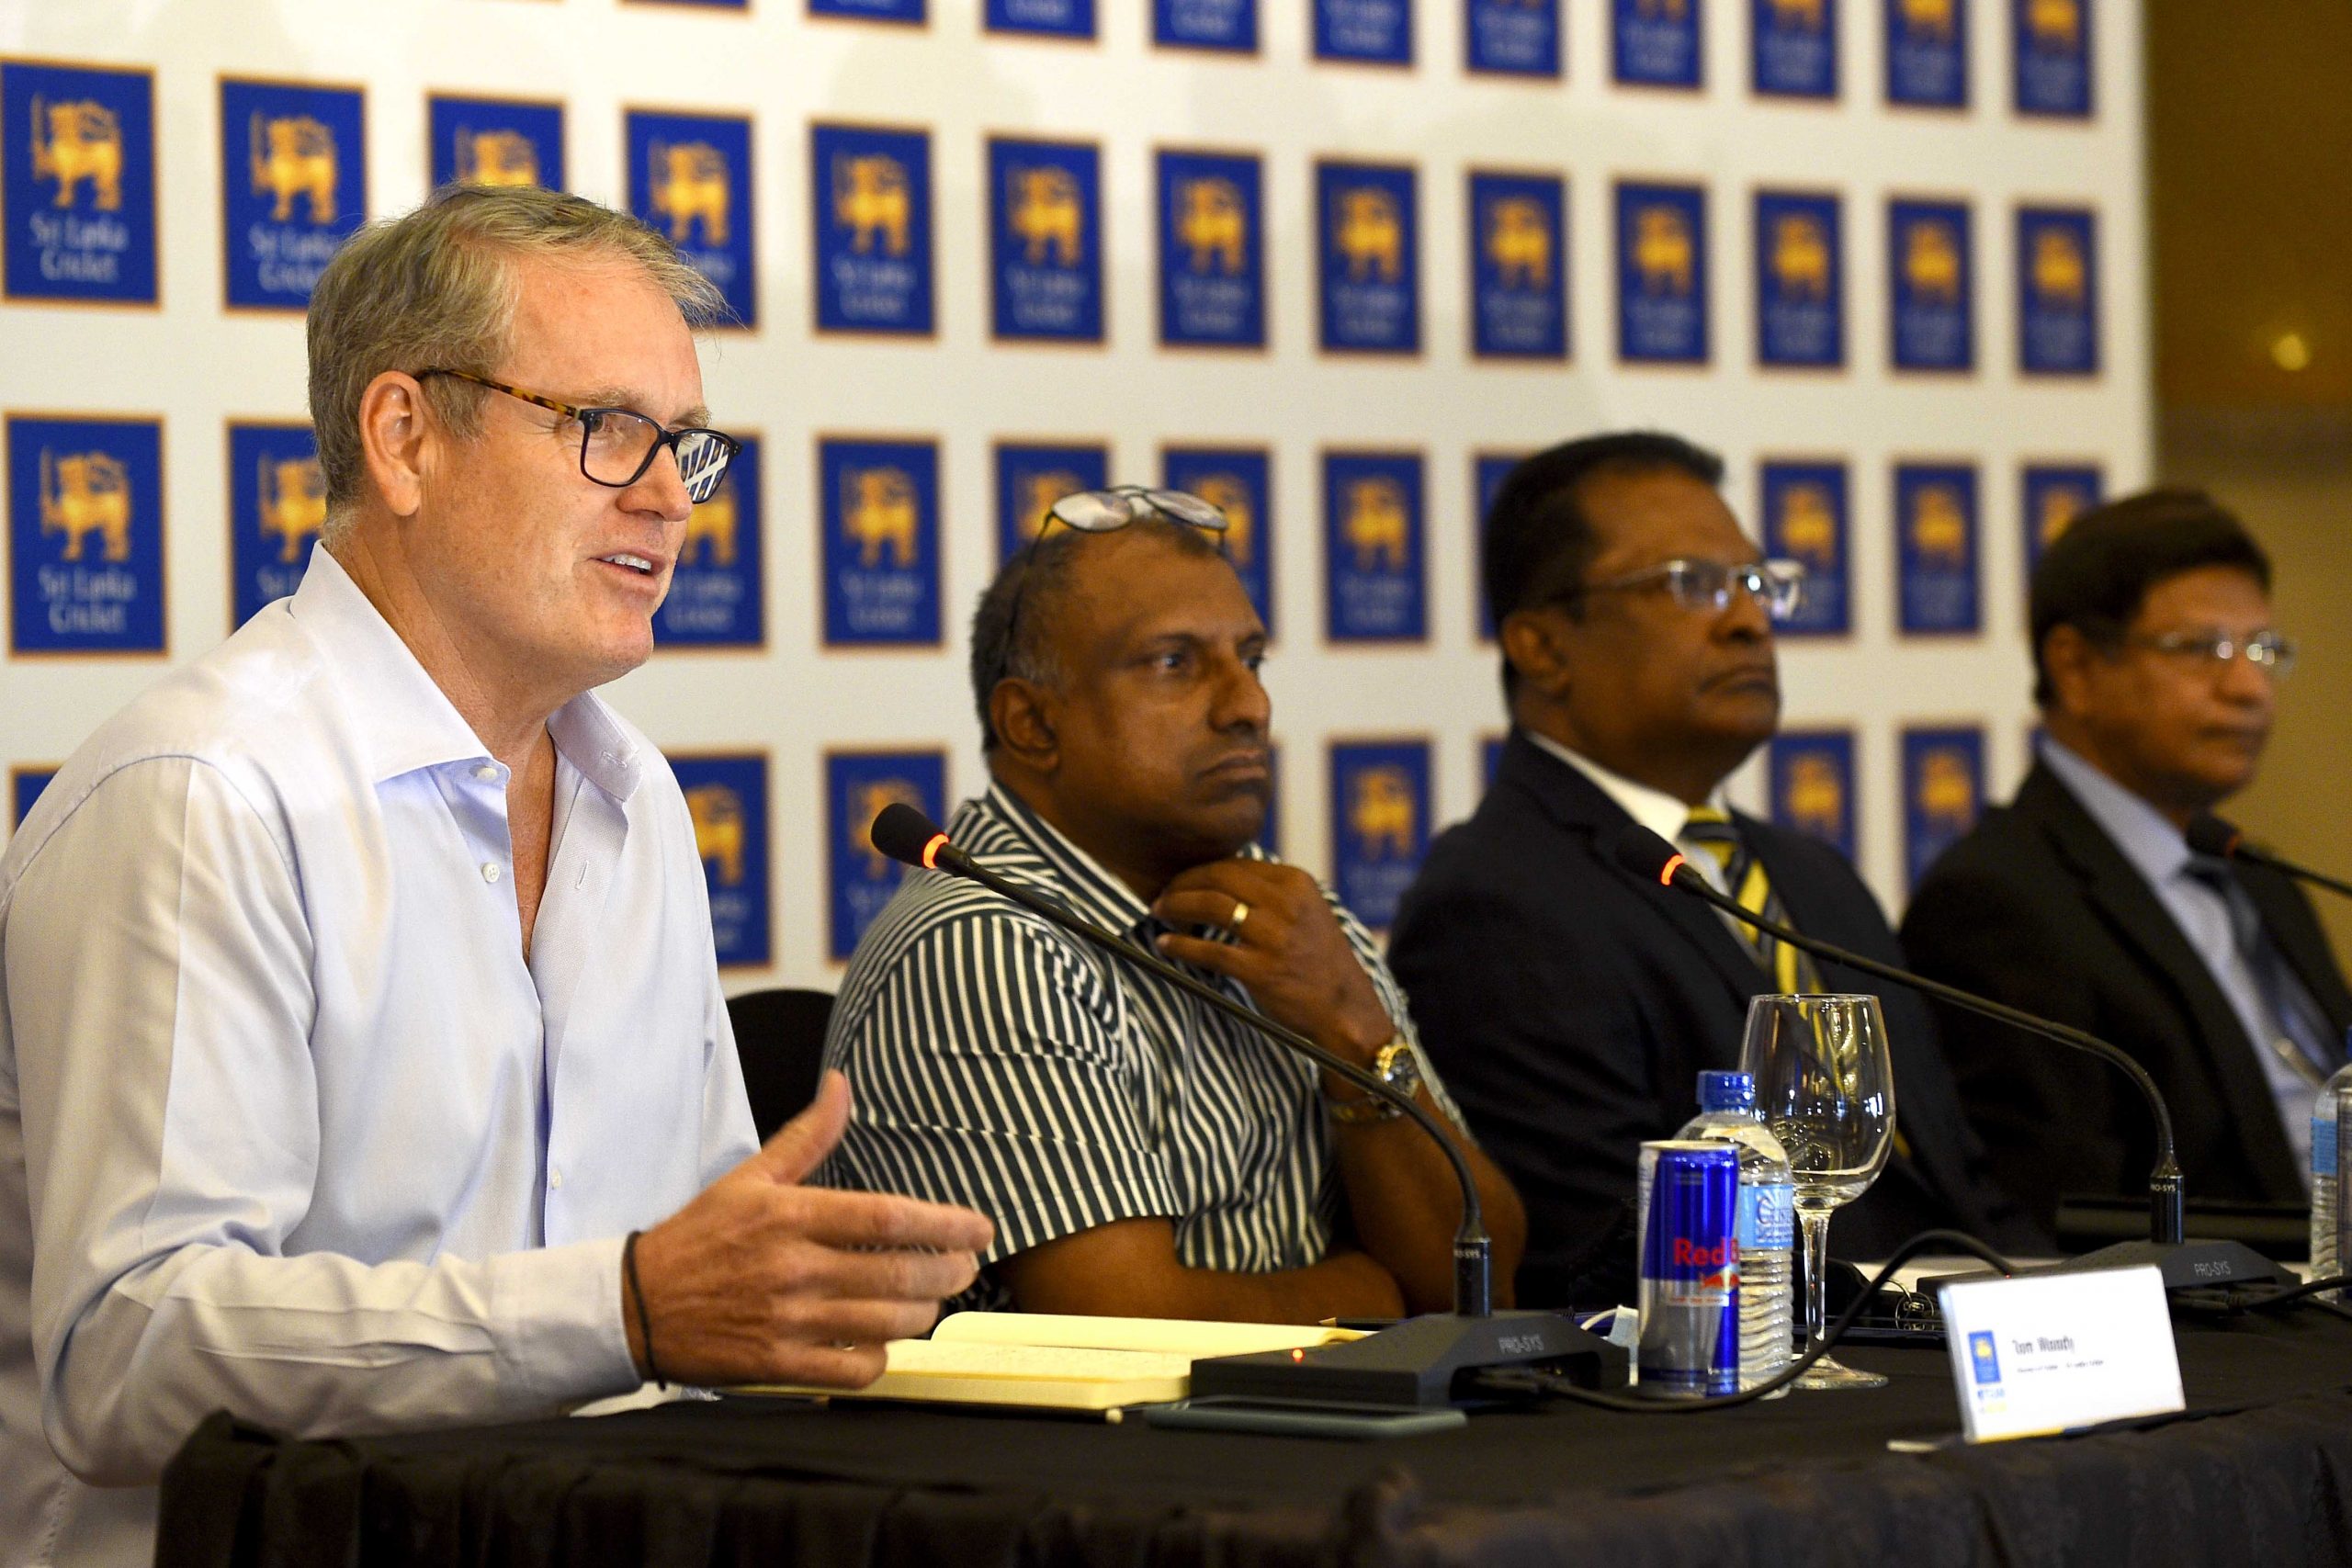 Tom Moody to exist from his contract